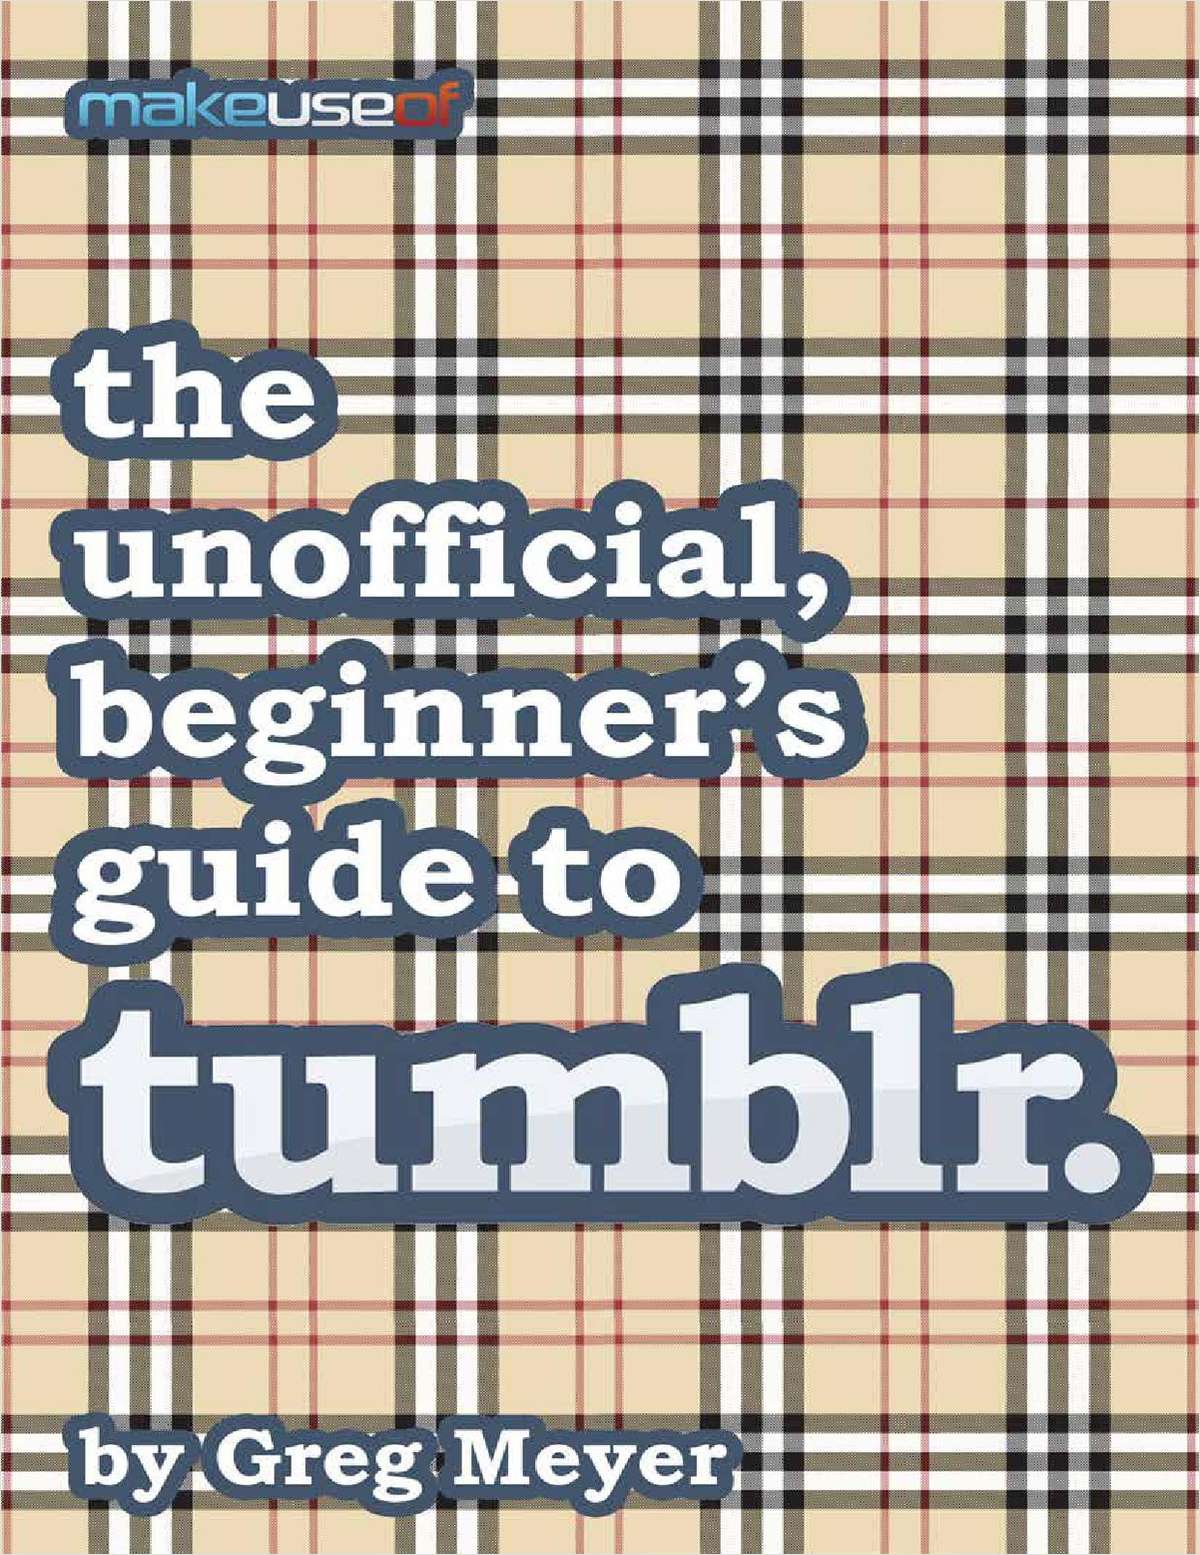 The Unofficial, Beginner's Guide to Tumblr